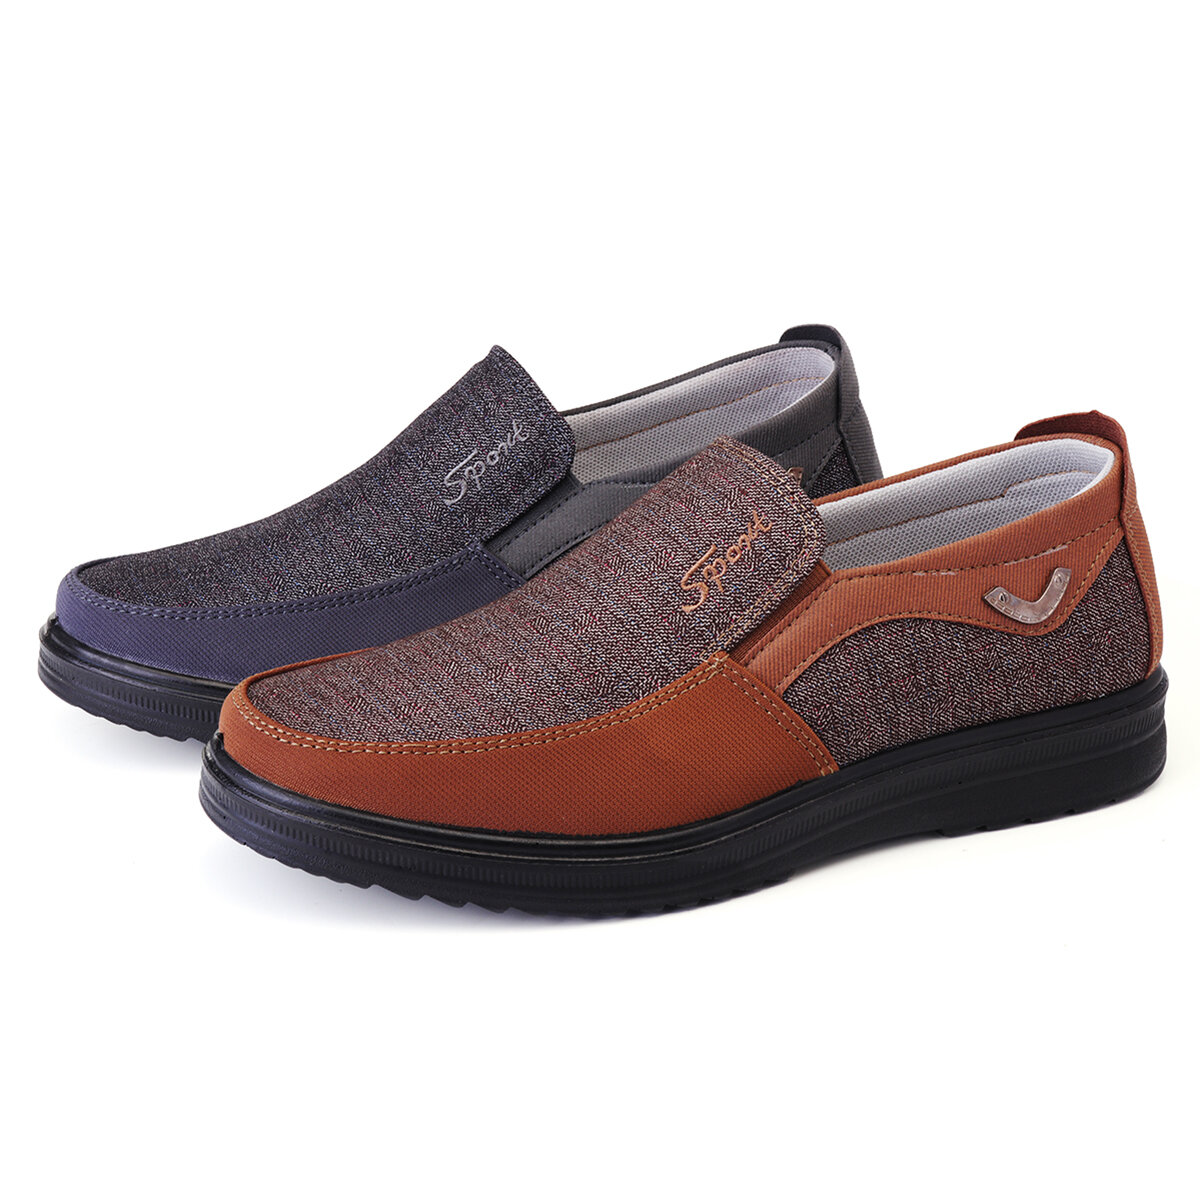 Men's Casual Shoes Leather Round Toe Shoes Non-slip Breathable Outdoor Hiking Flat Shoes